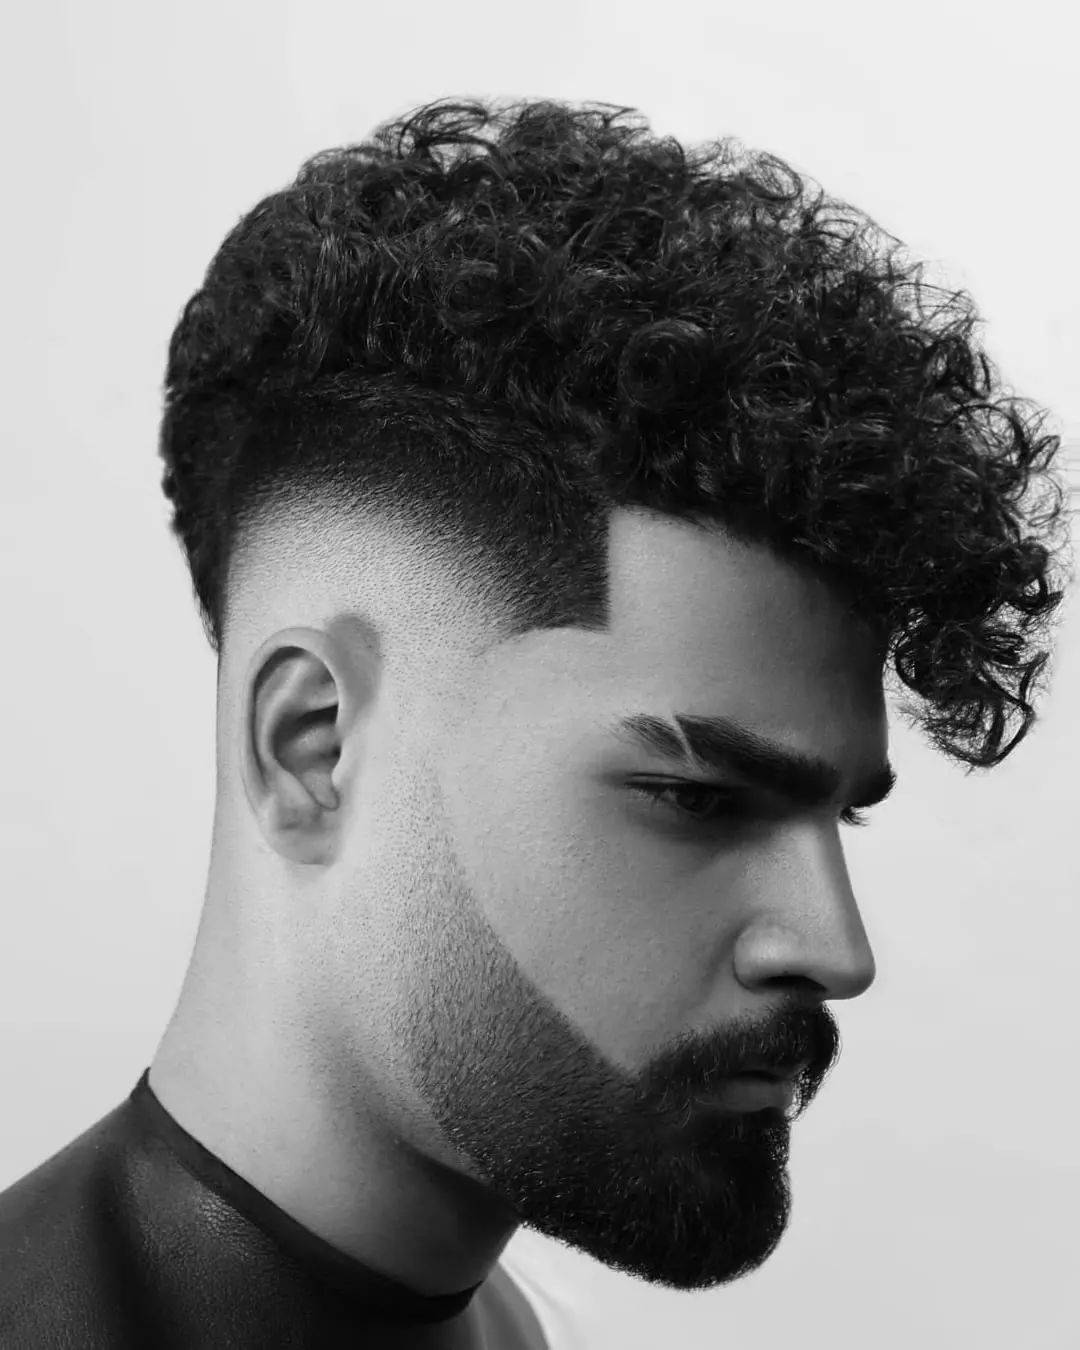 Hairstyle for Men 273 best haircut for men | haircut for men | haircuts for men Haircut for Men